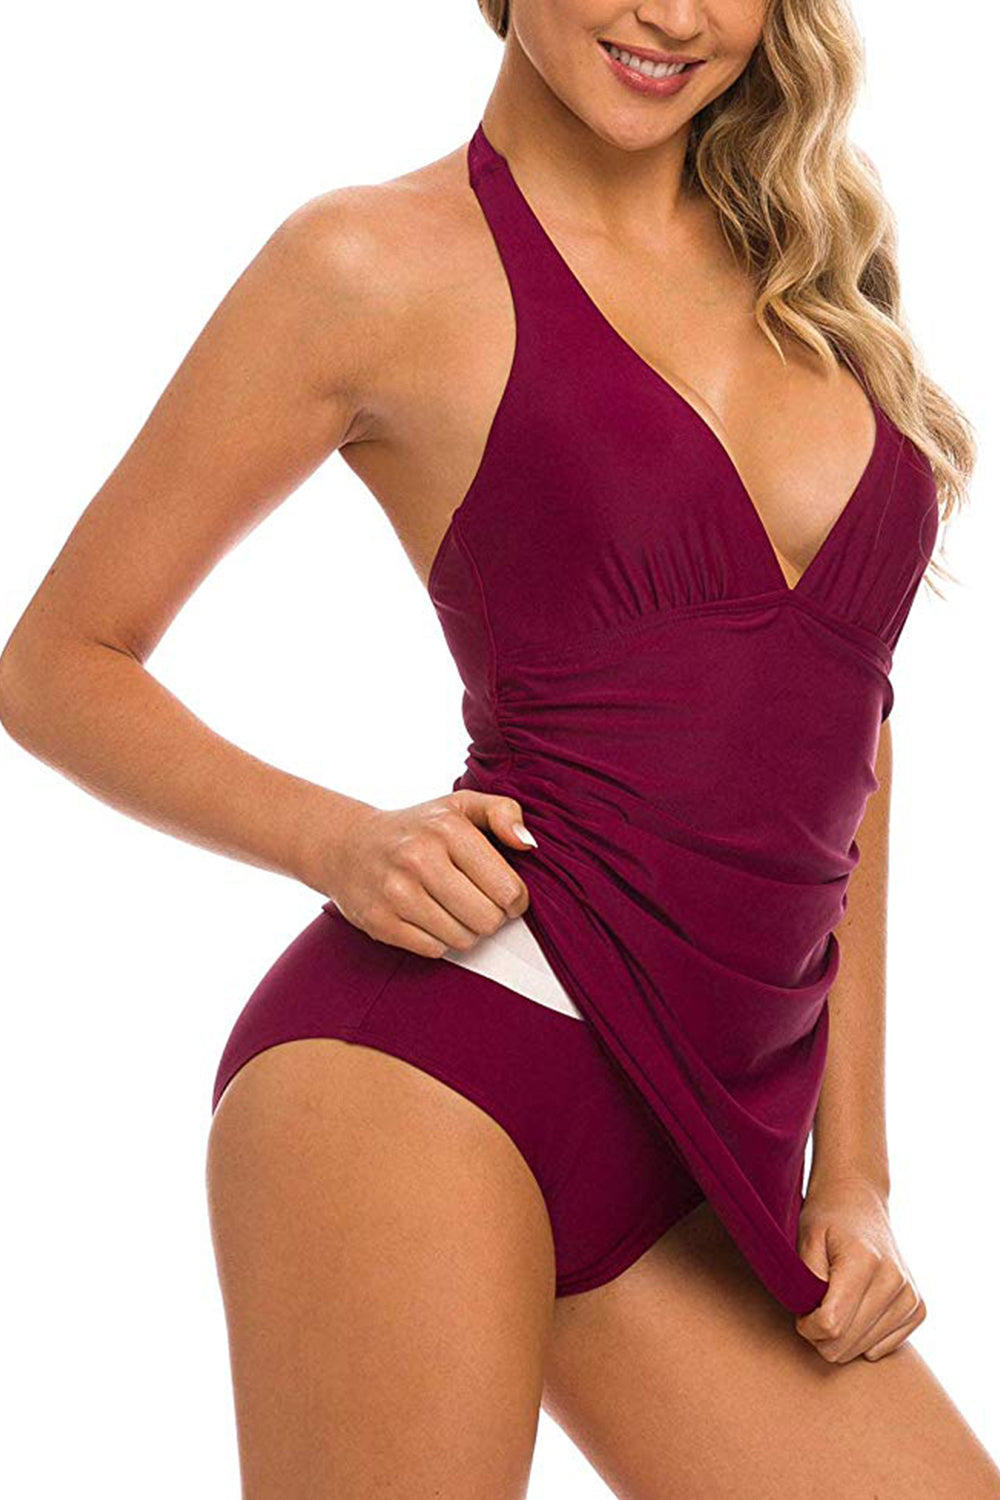 Women's Padded One Piece Swimsuits V-Neck Shirred Tummy Control Bathing Suits